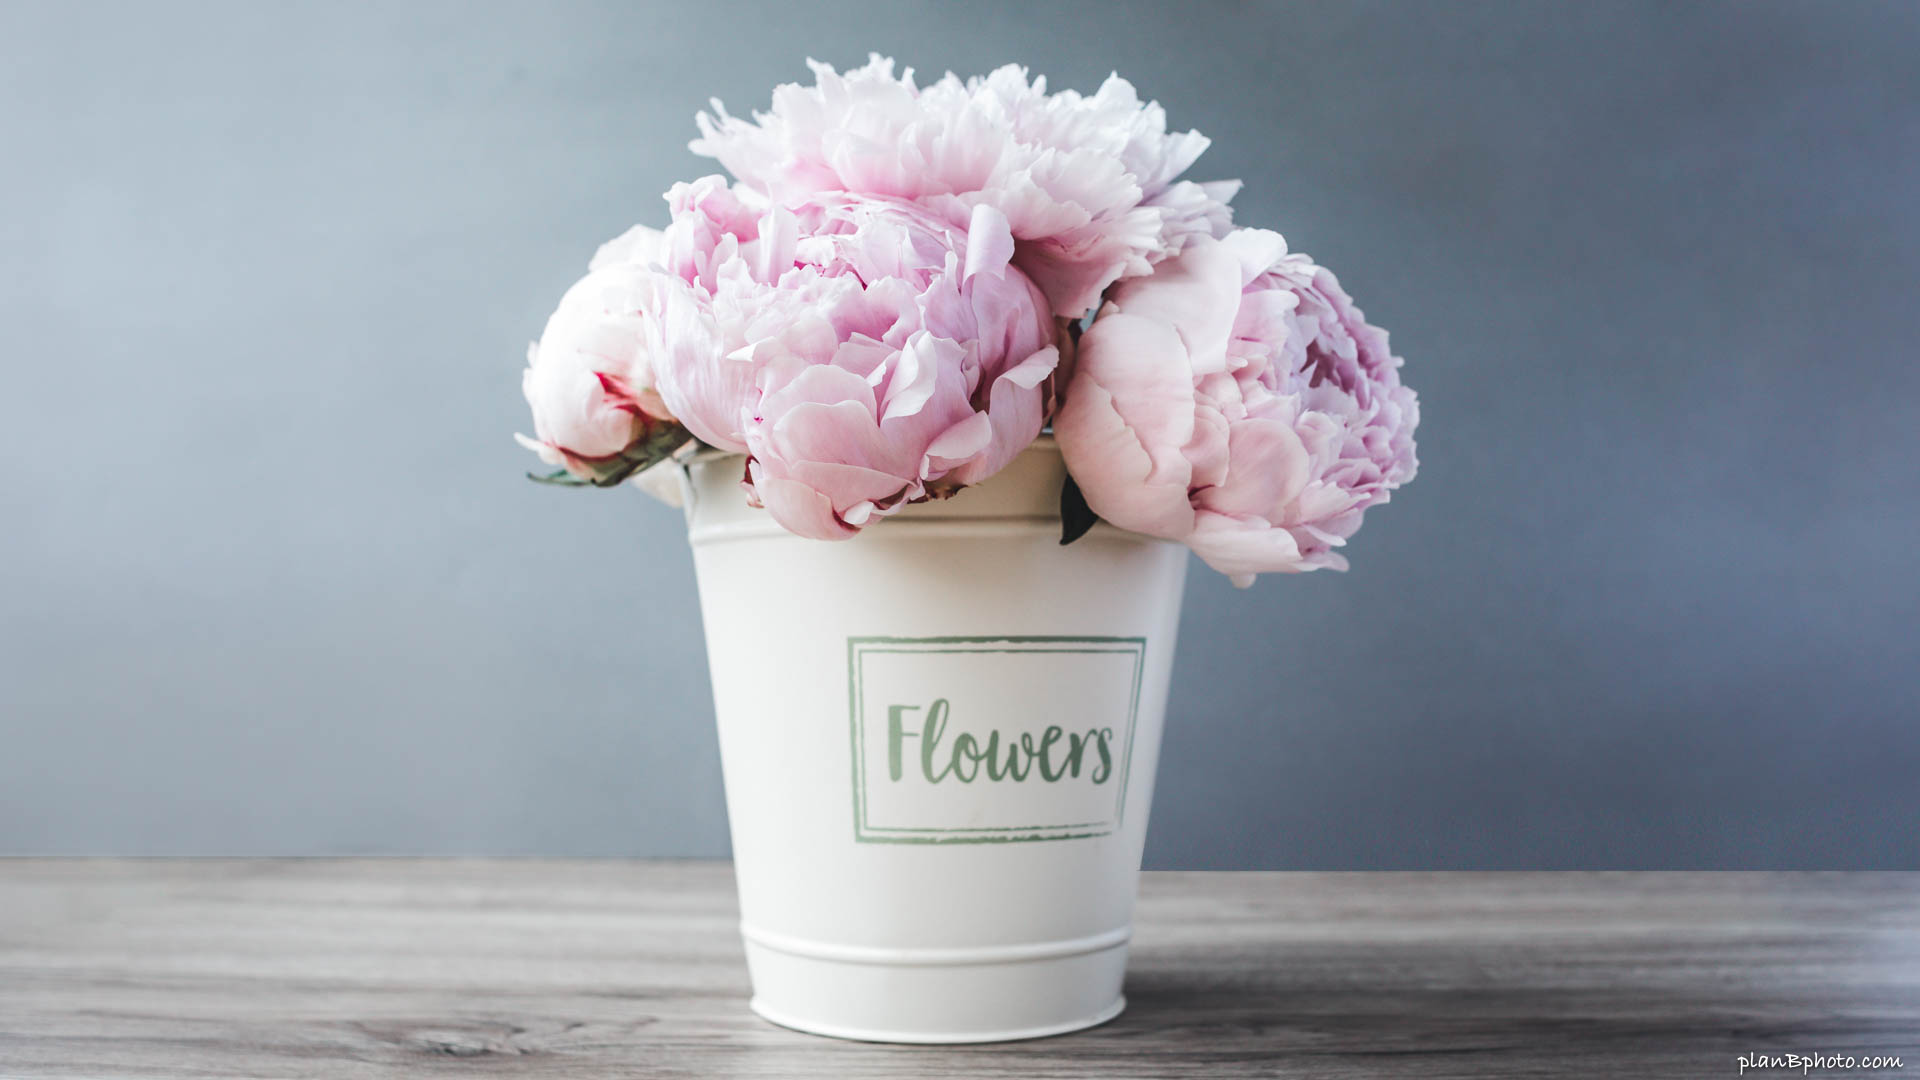 Bouquet of large pink peonies in a white bucket on grey background